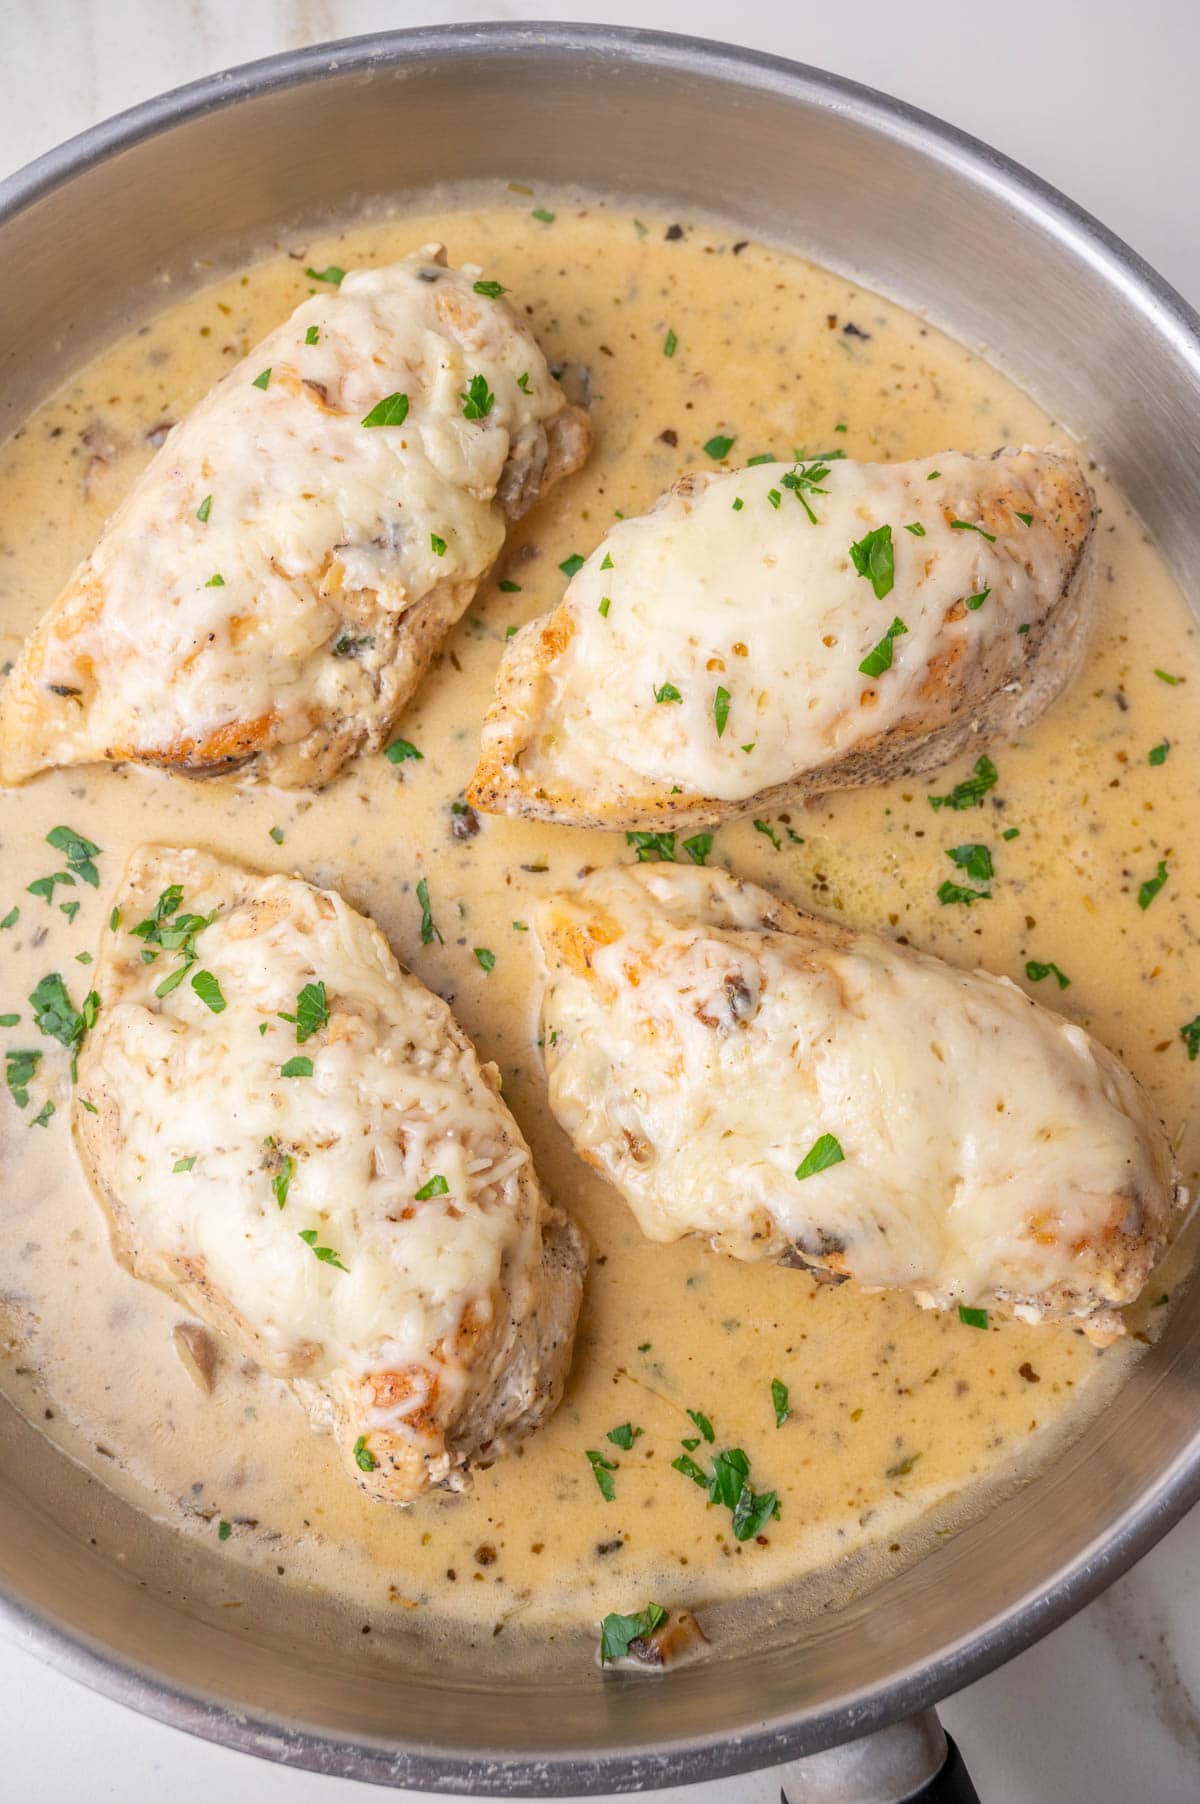 Four mushroom-stuffed chicken breasts in a creamy sauce in a pan.